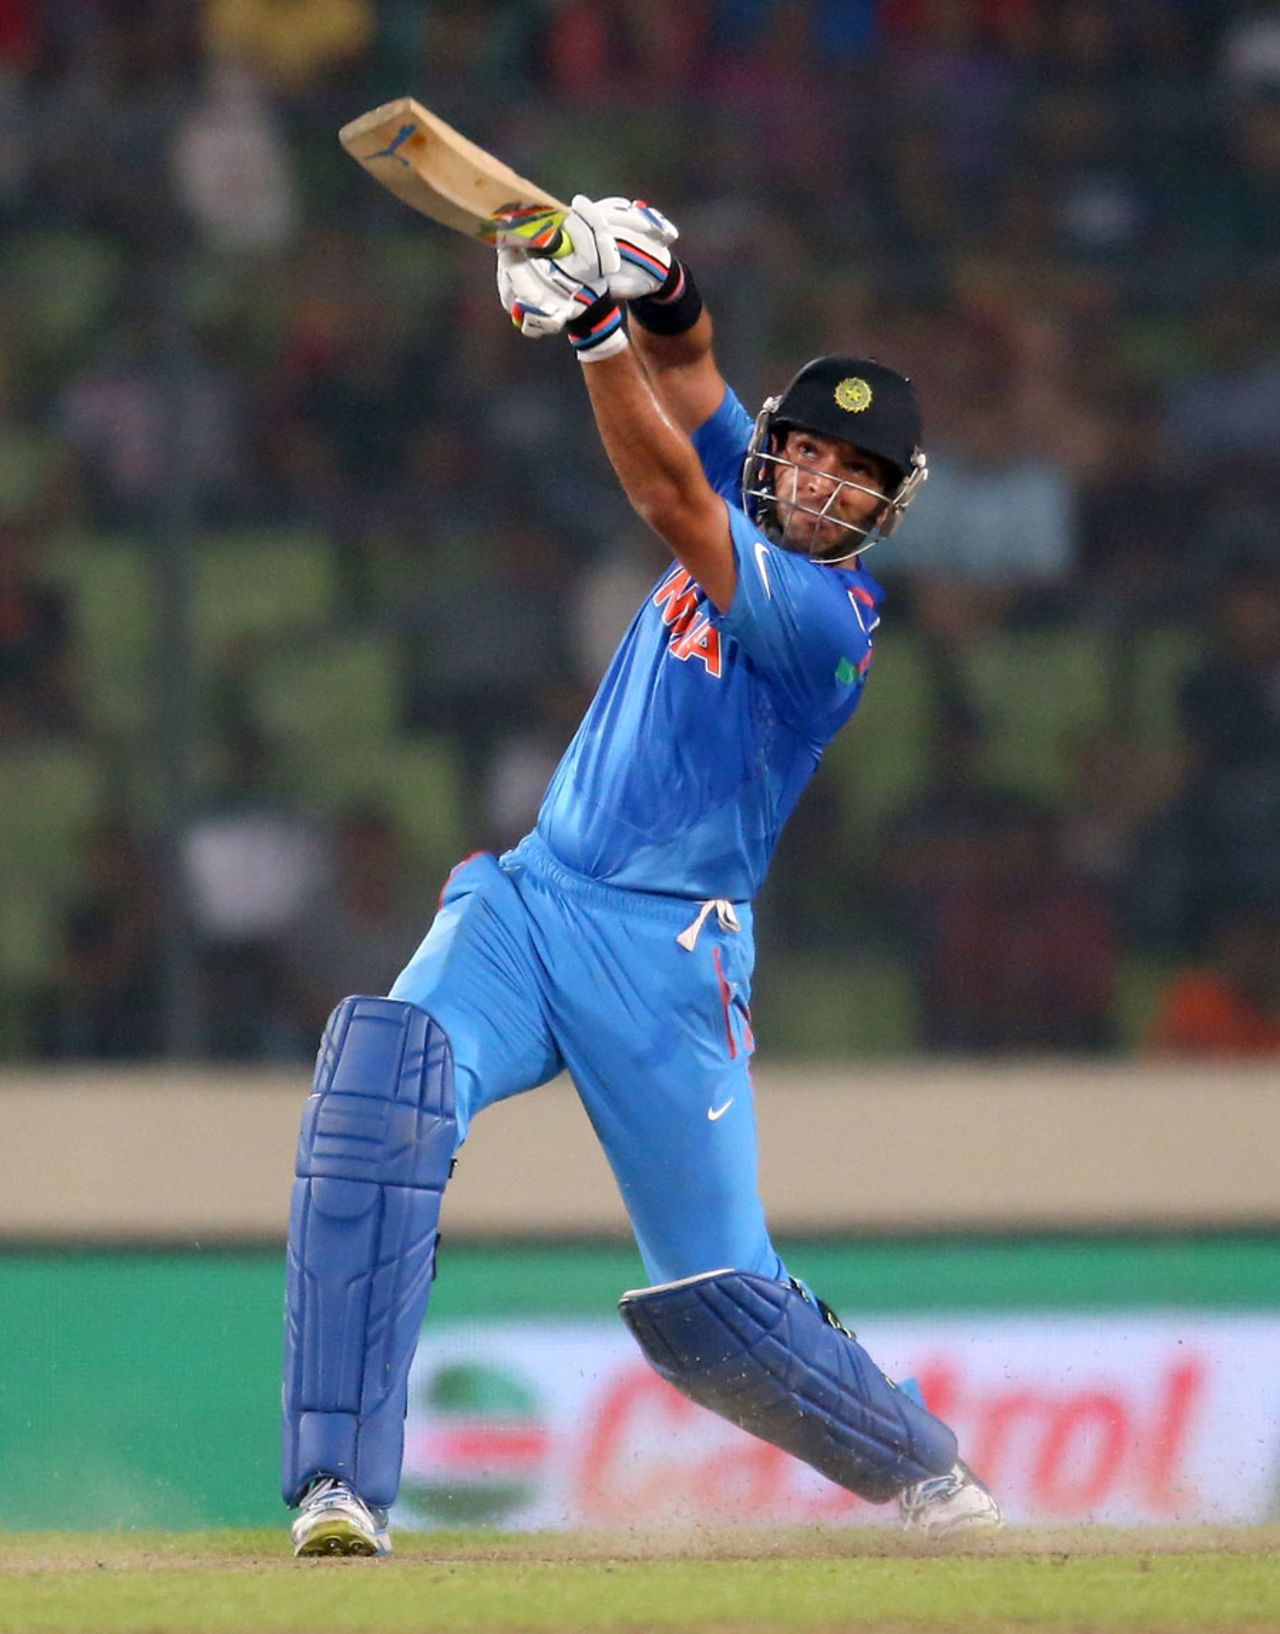 Yuvraj Singh launches the ball over the top, Australia v India, World T20, Group 2, Mirpur, March 30, 2014